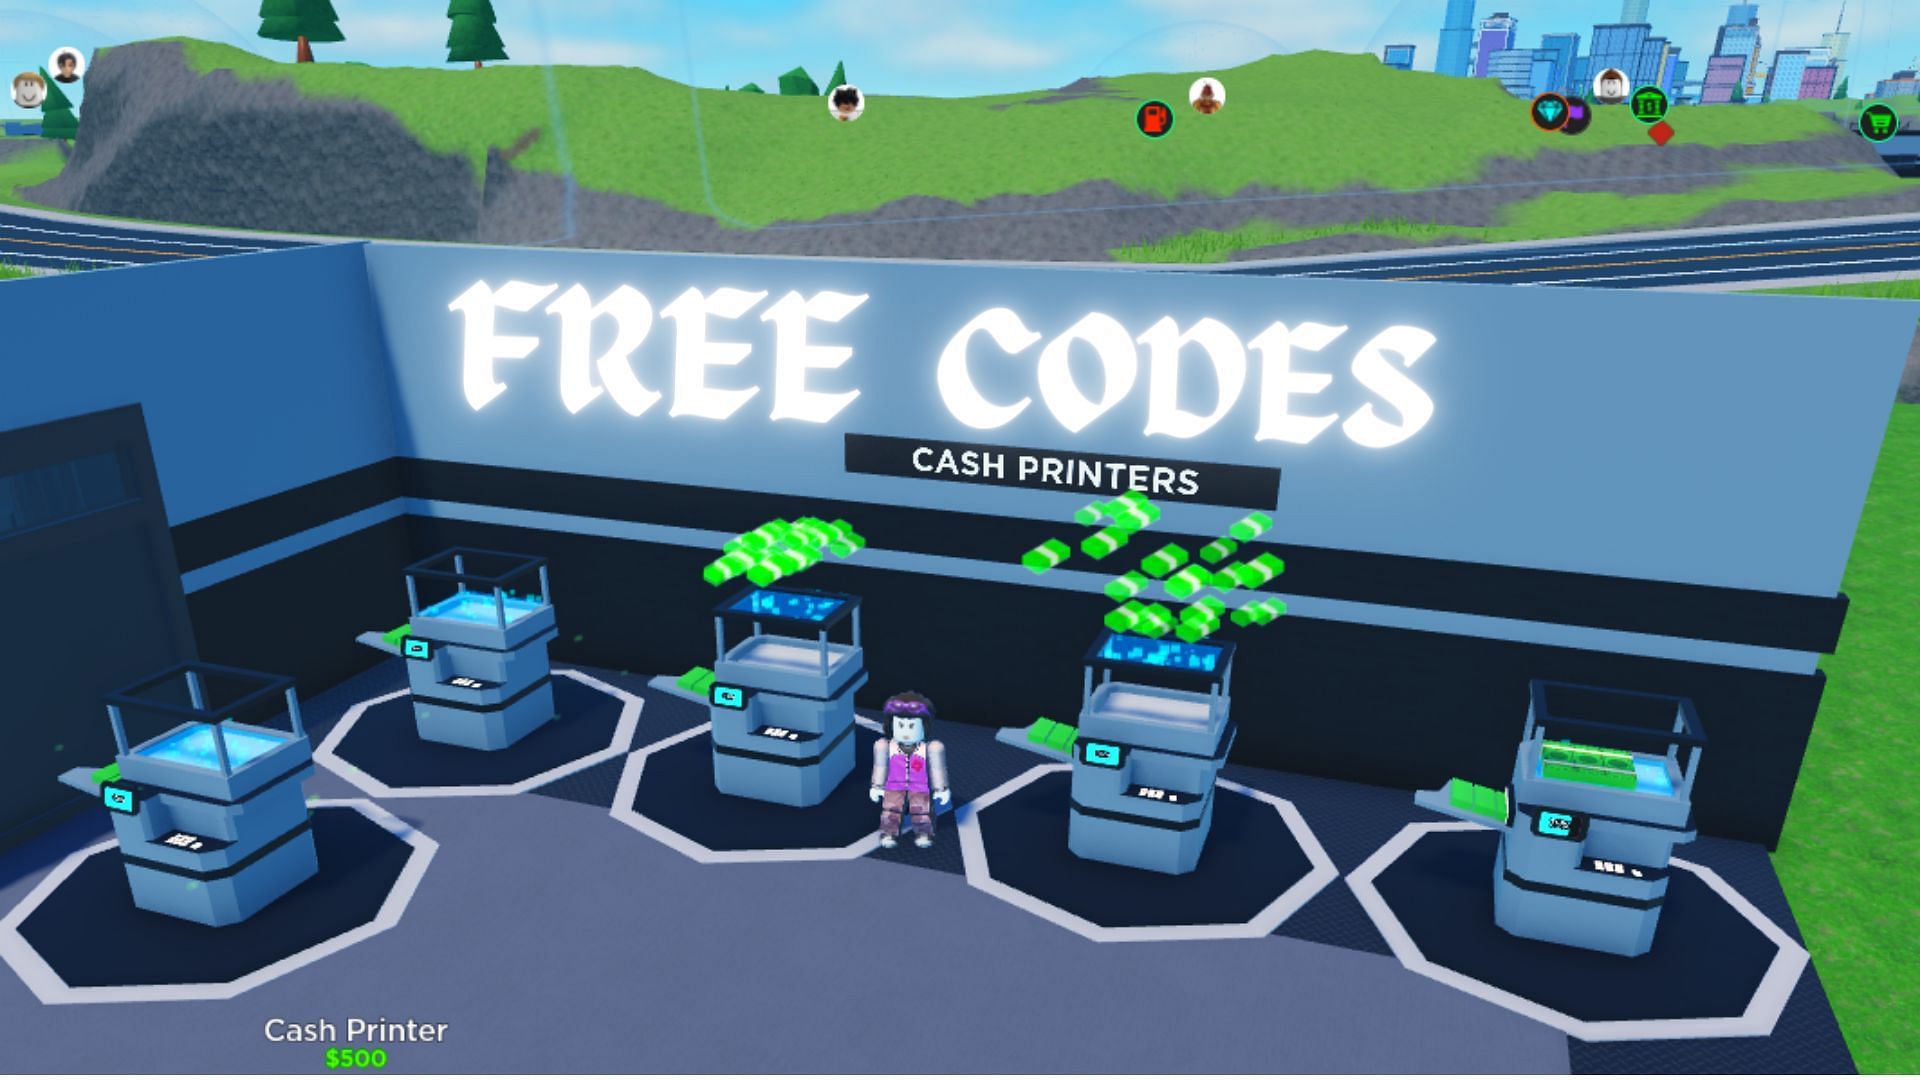 Free Active codes in Criminal Tycoon (Image via Roblox)